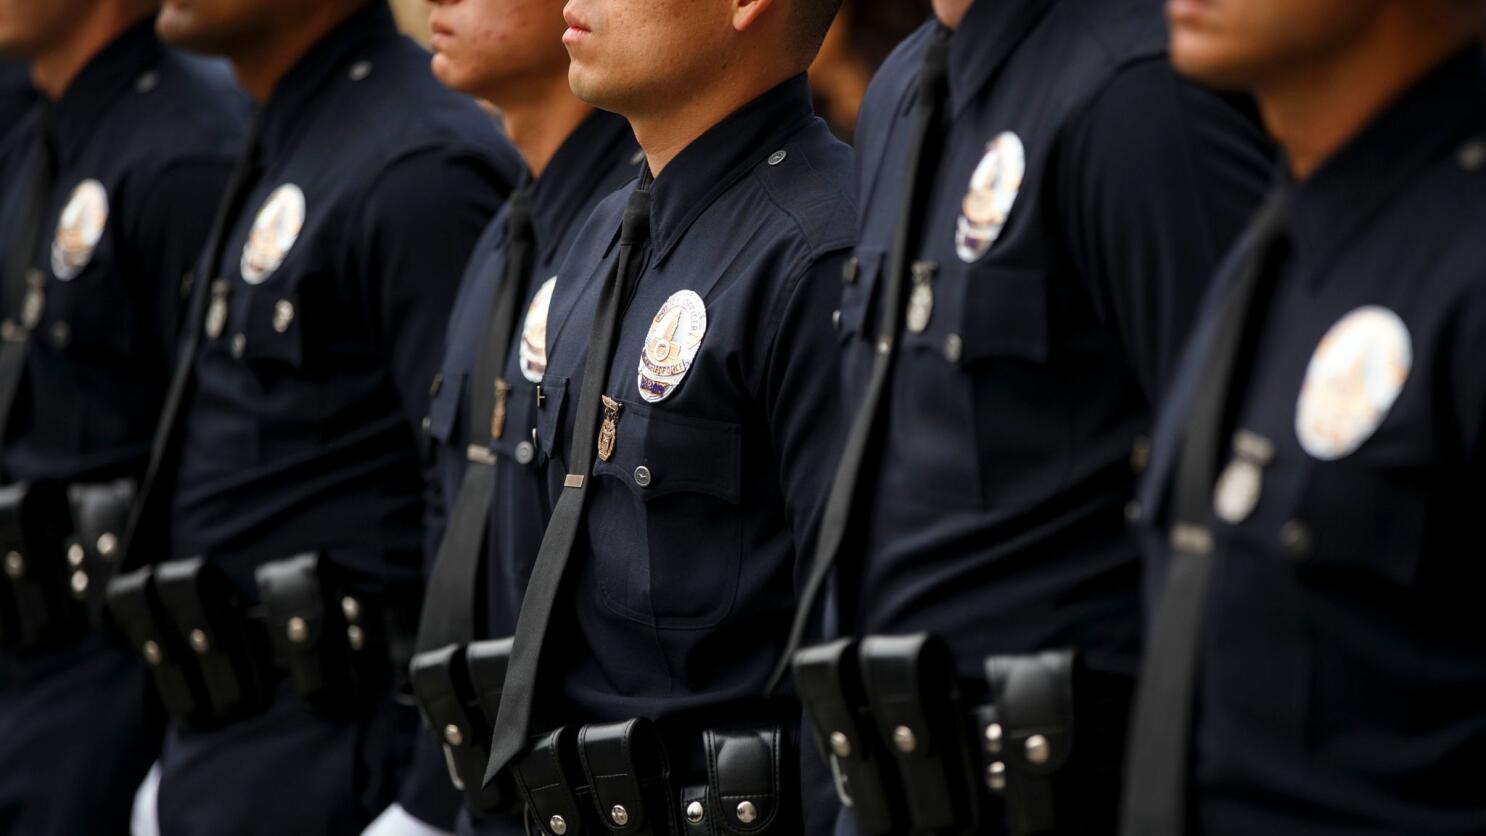 Meet the first U.S. police department to deploy body cameras